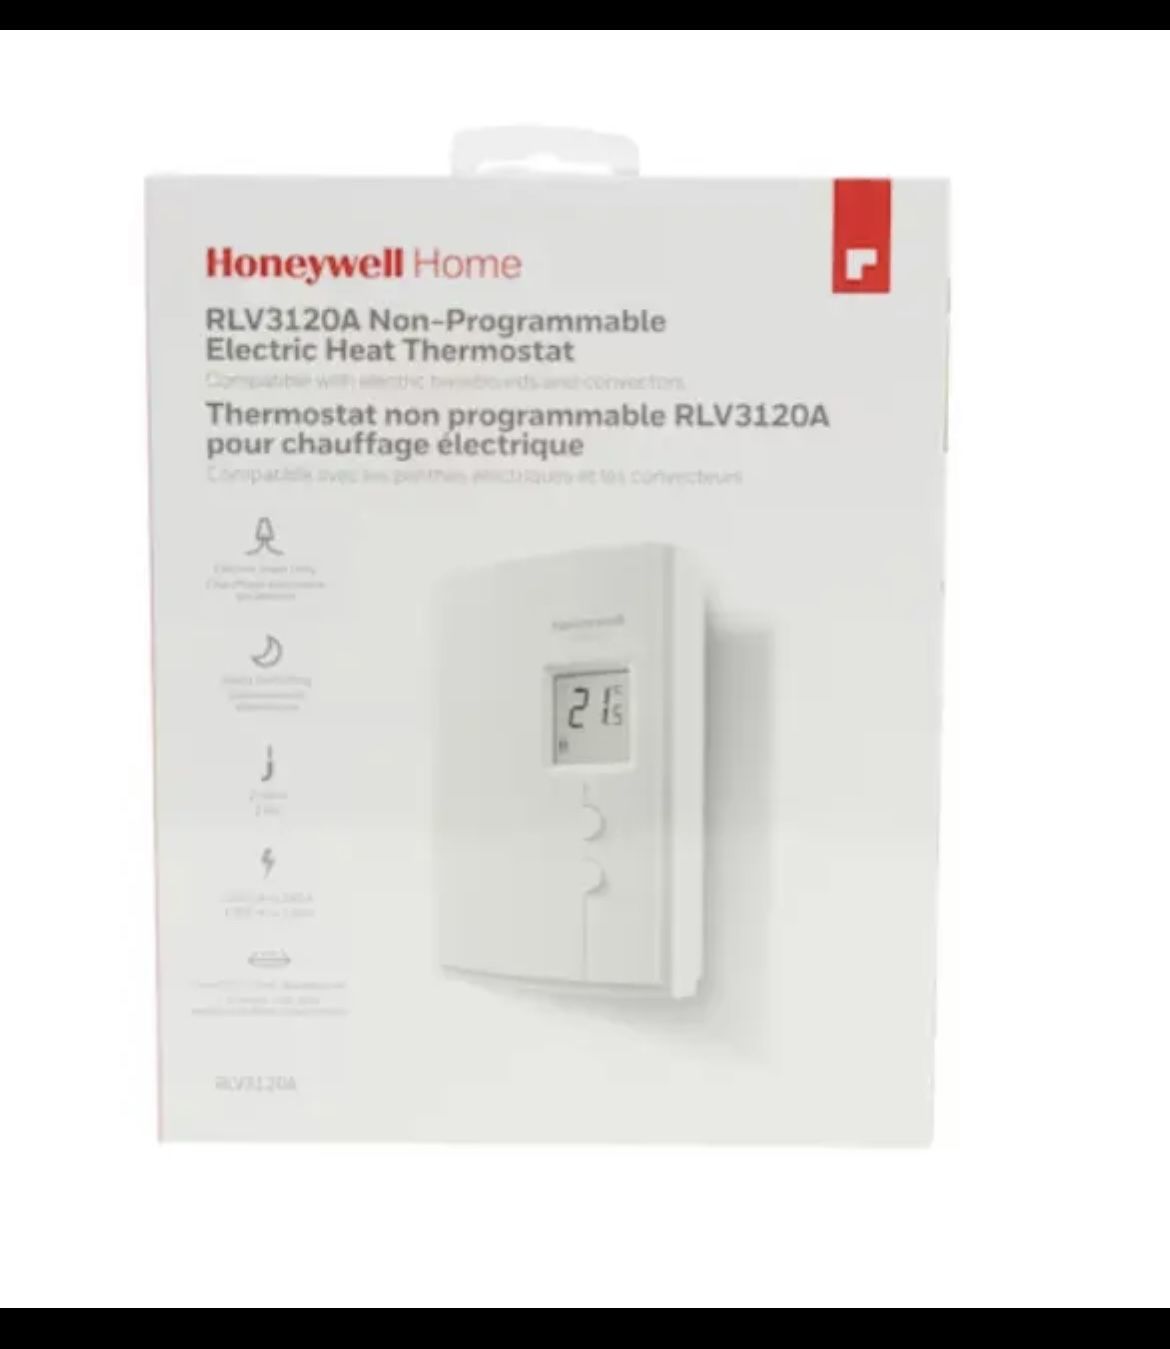 Honeywell Home Digital Baseboard Heater Thermostat - RLV3120A